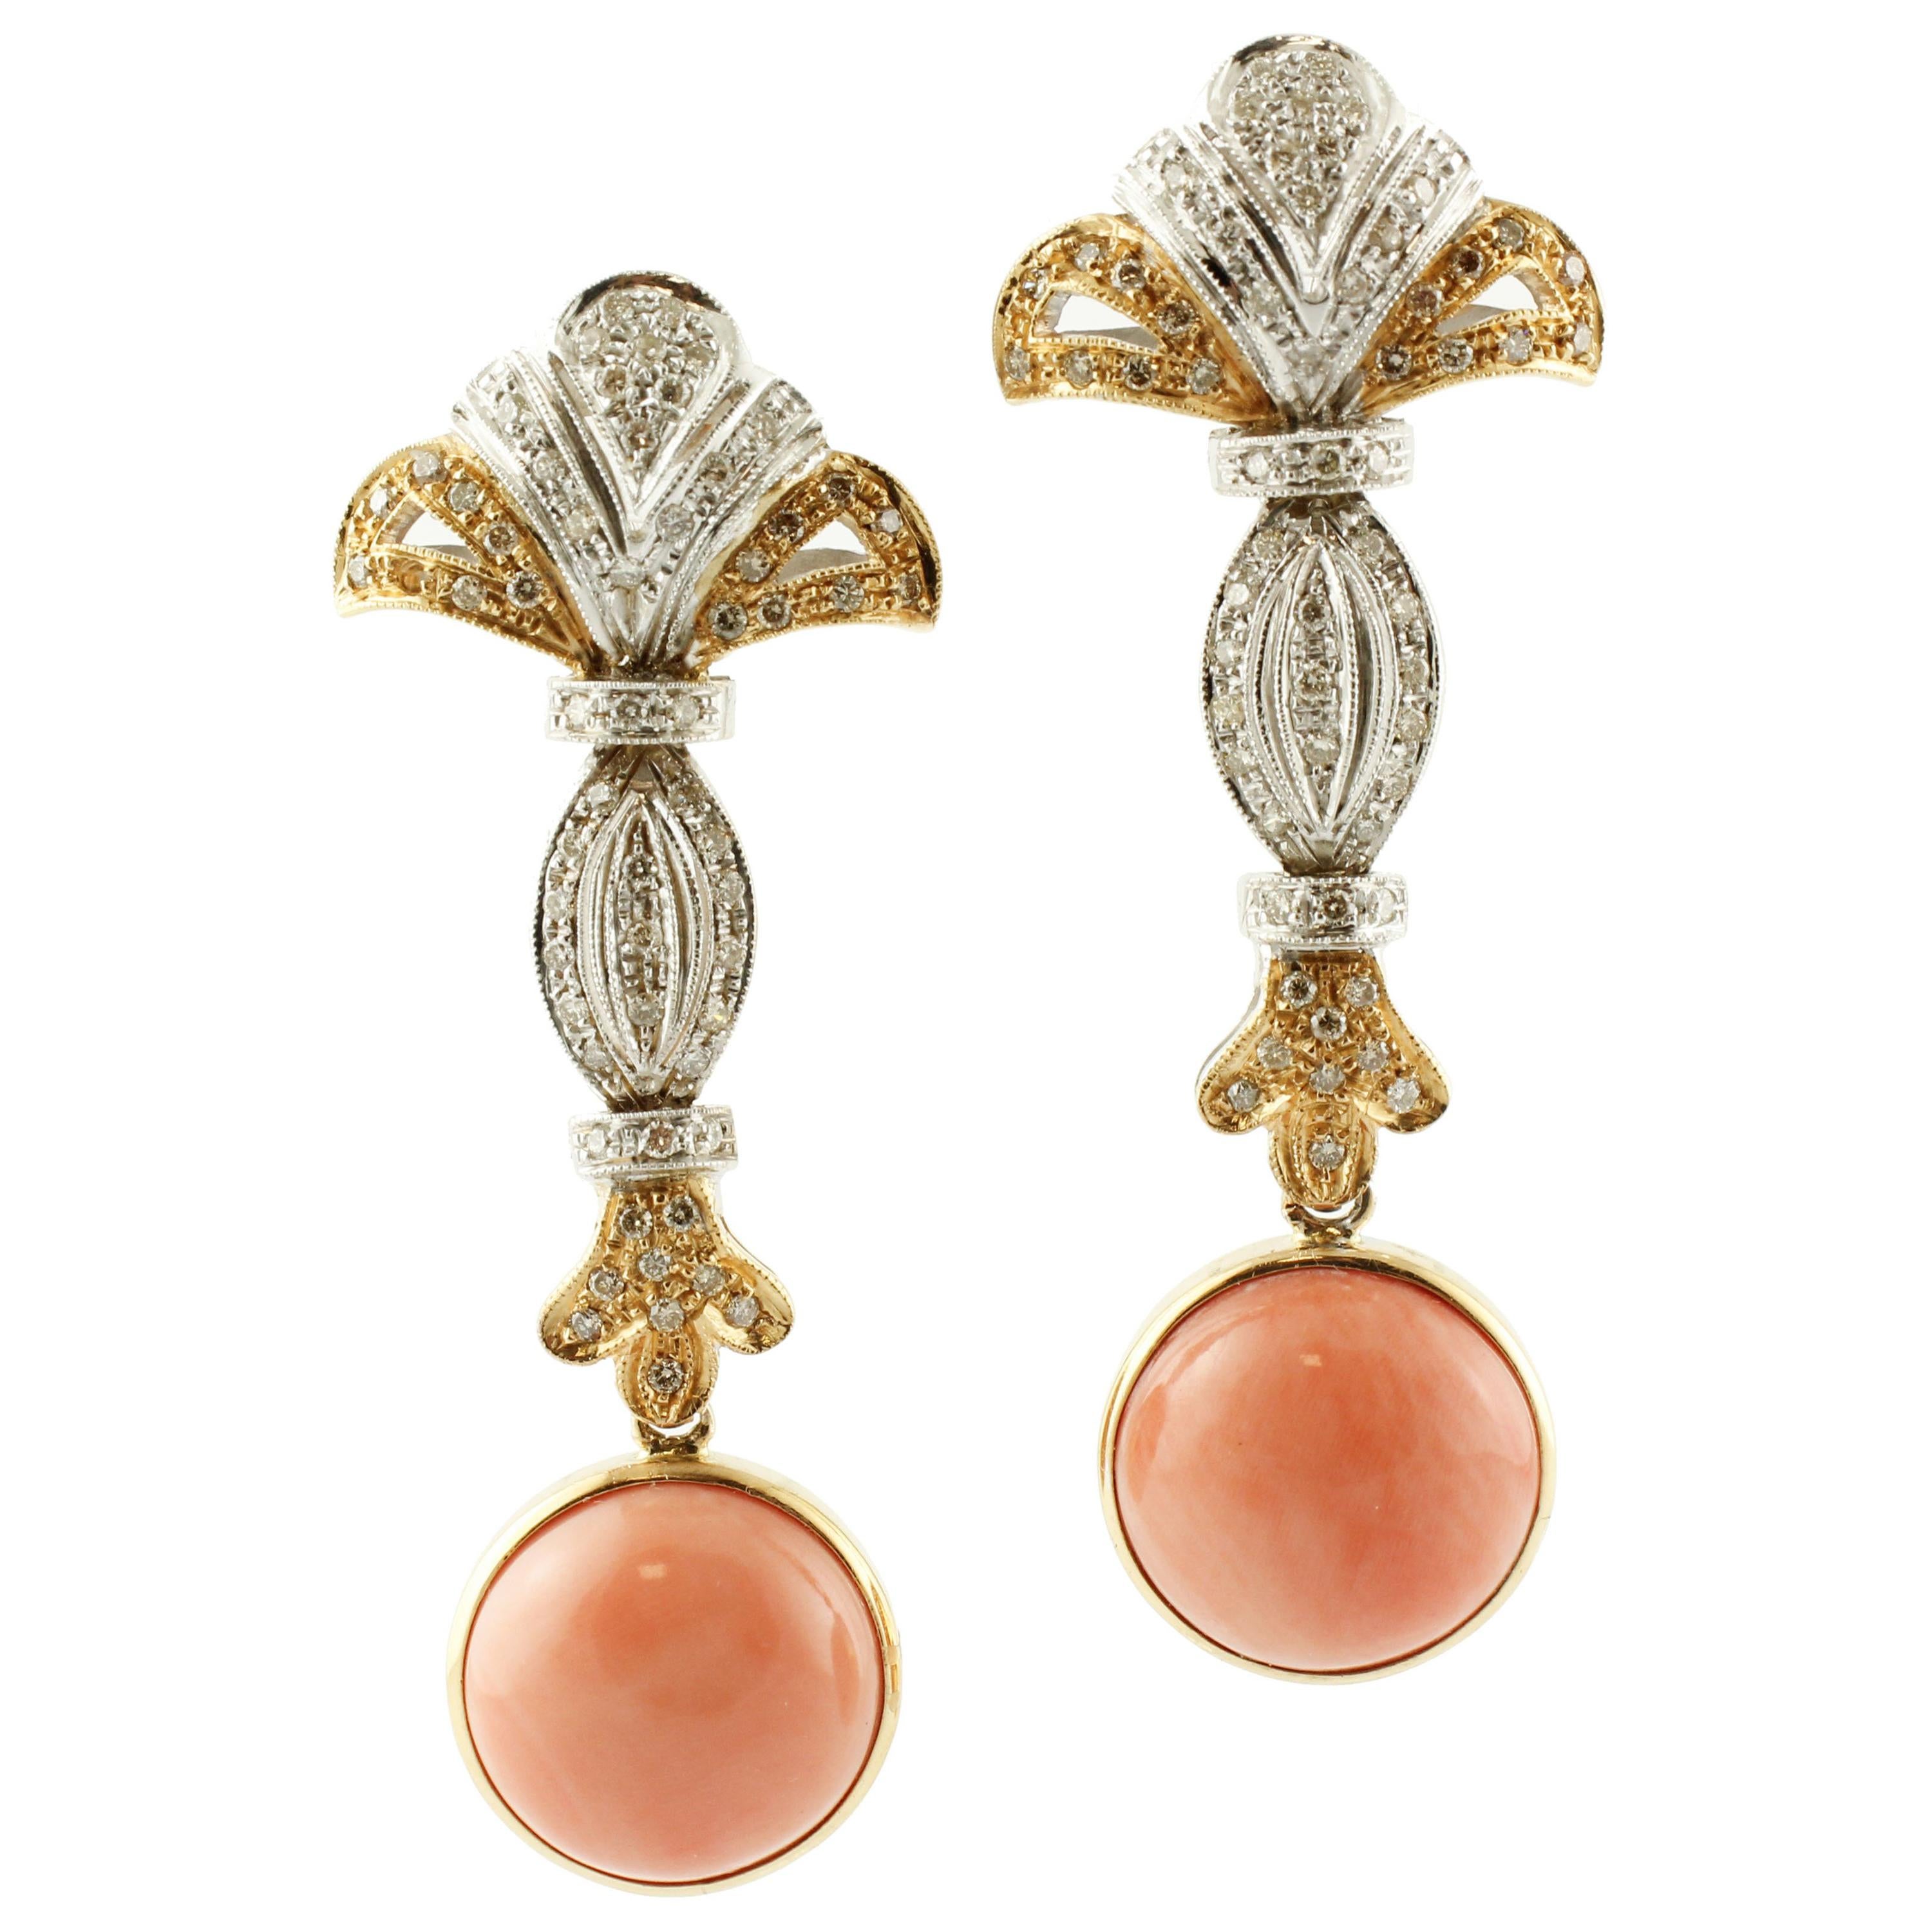 Coral Secundum, Diamonds, White and Yellow Gold, Retro Dagling Earrings